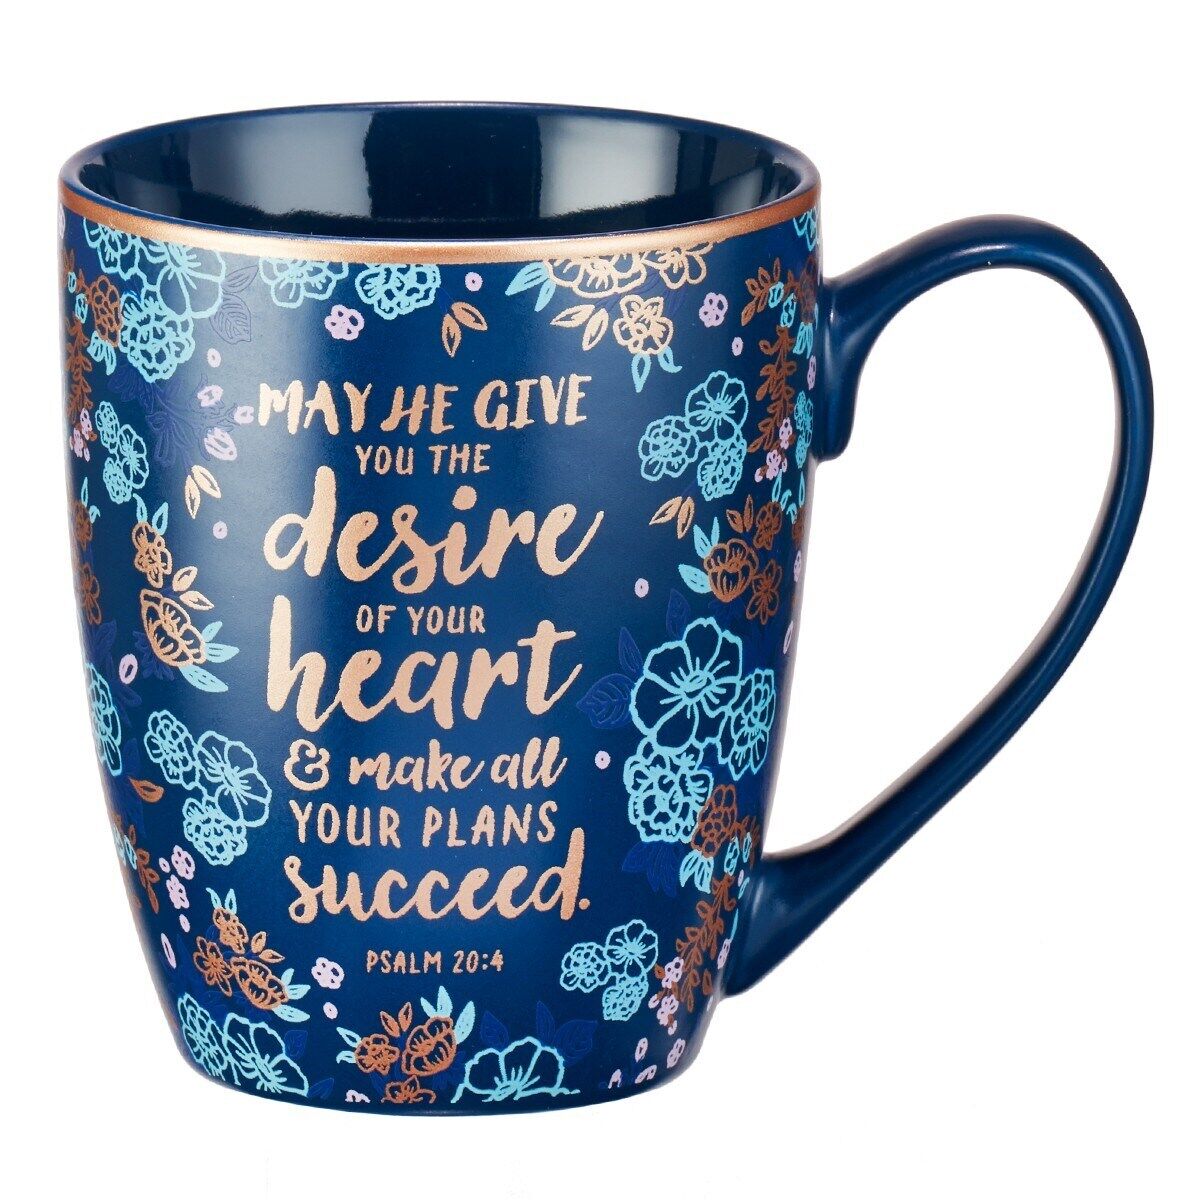 Mug-May He Give You The Desires Of Your Heart w/Gift Box (Psalm 20:4)-Navy